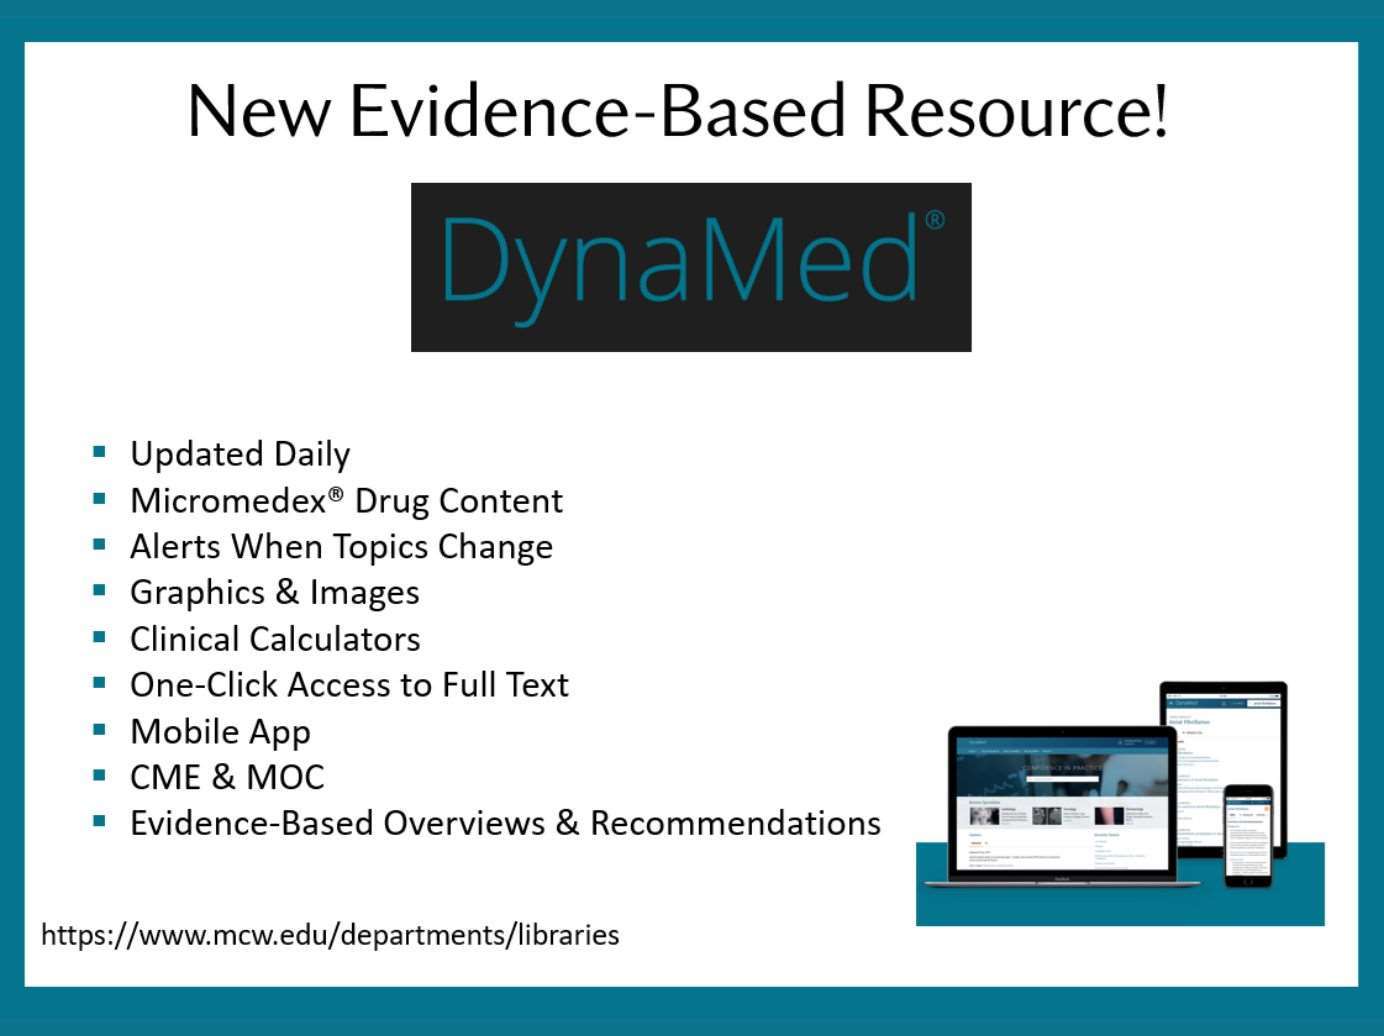 New Evidence-Based Resource: DynaMed